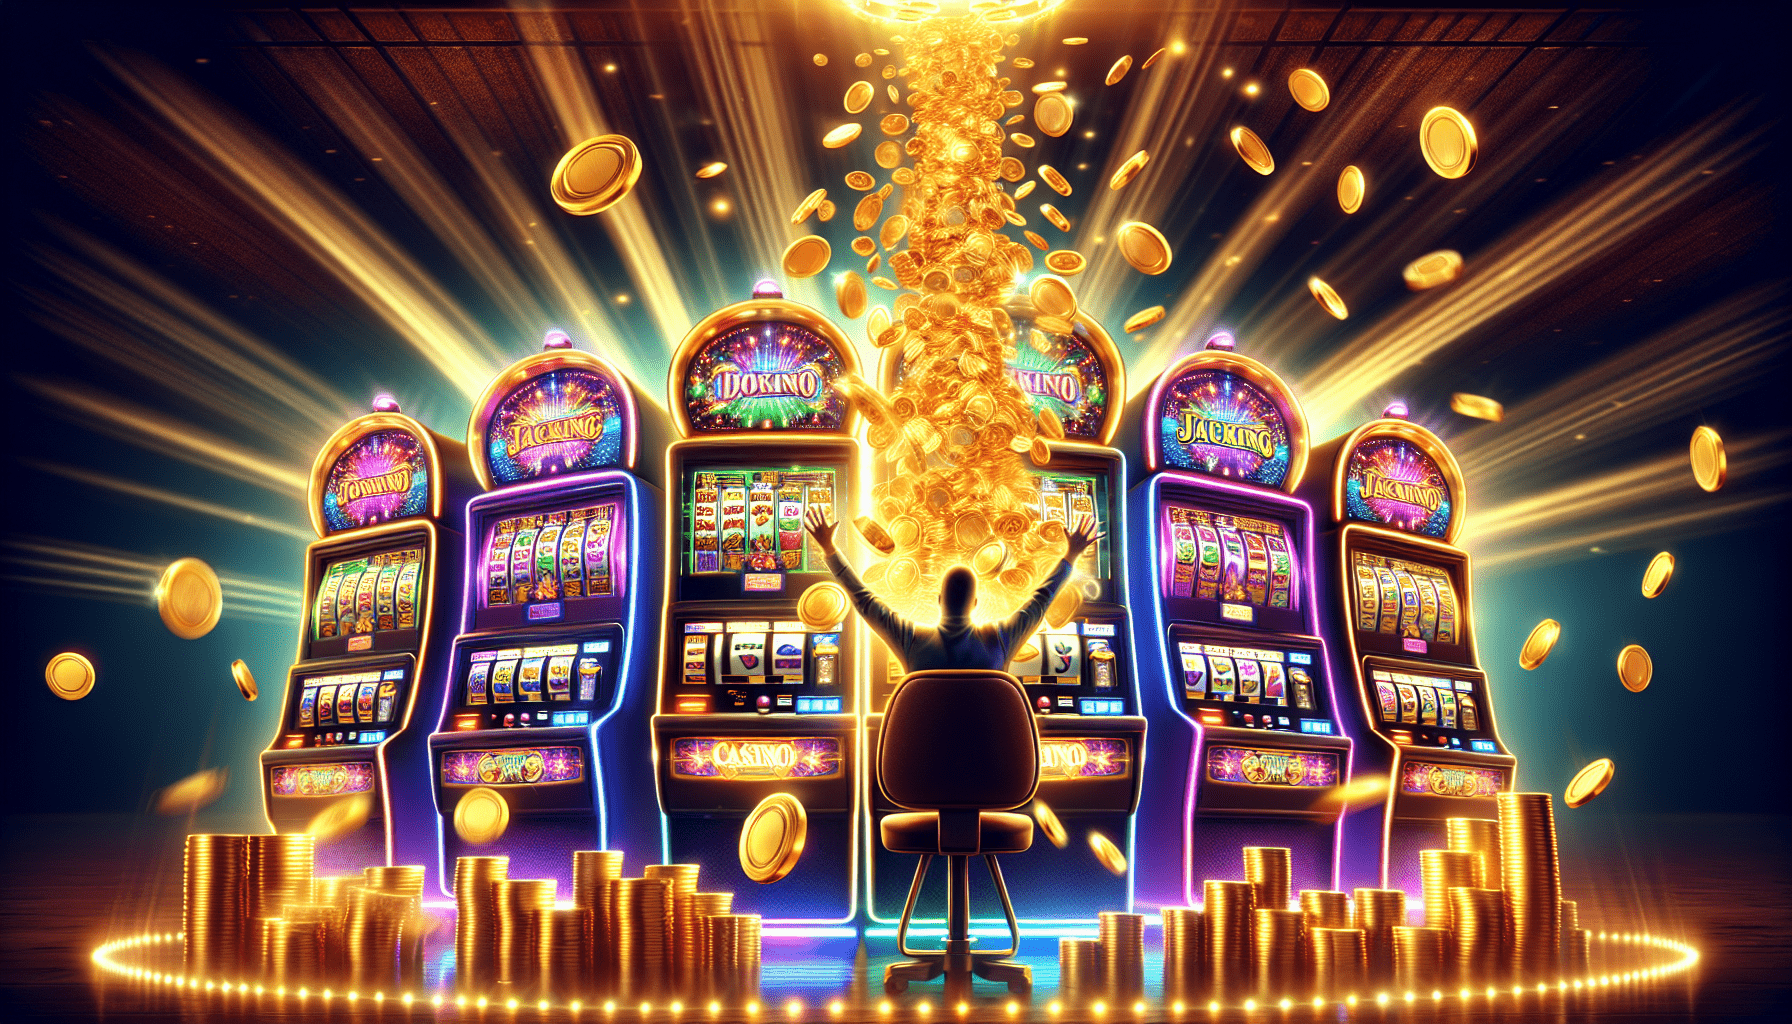 What Casino Has Best Slot Payouts?